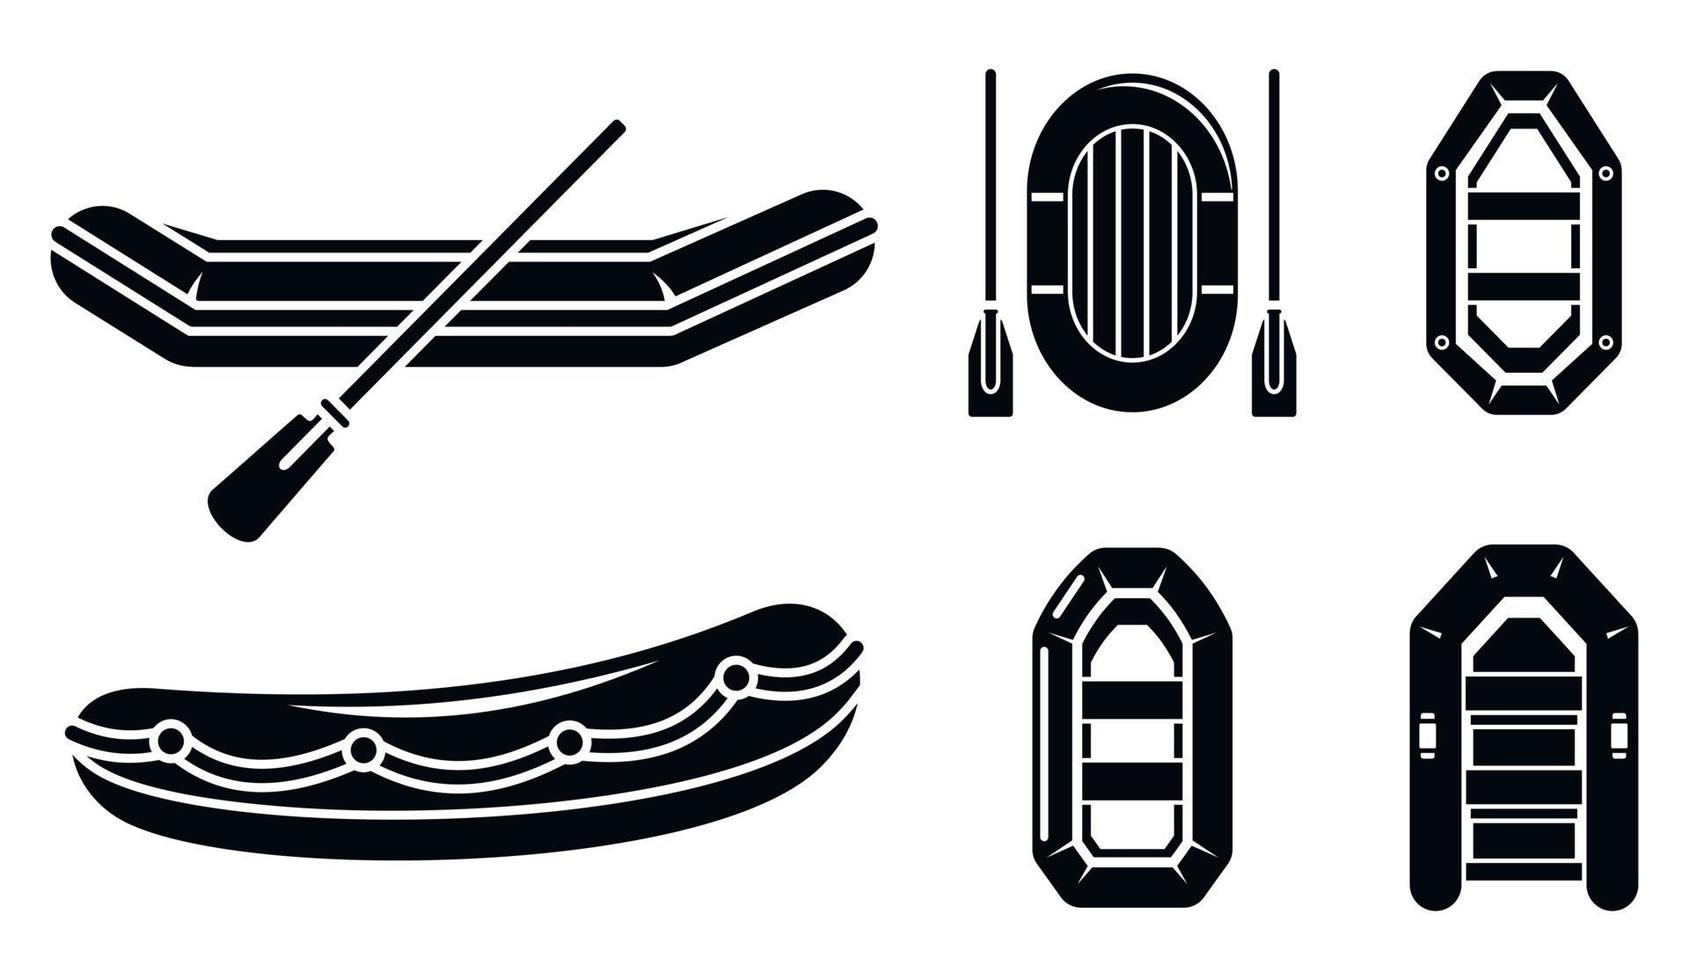 River inflatable boat icon set, simple style vector